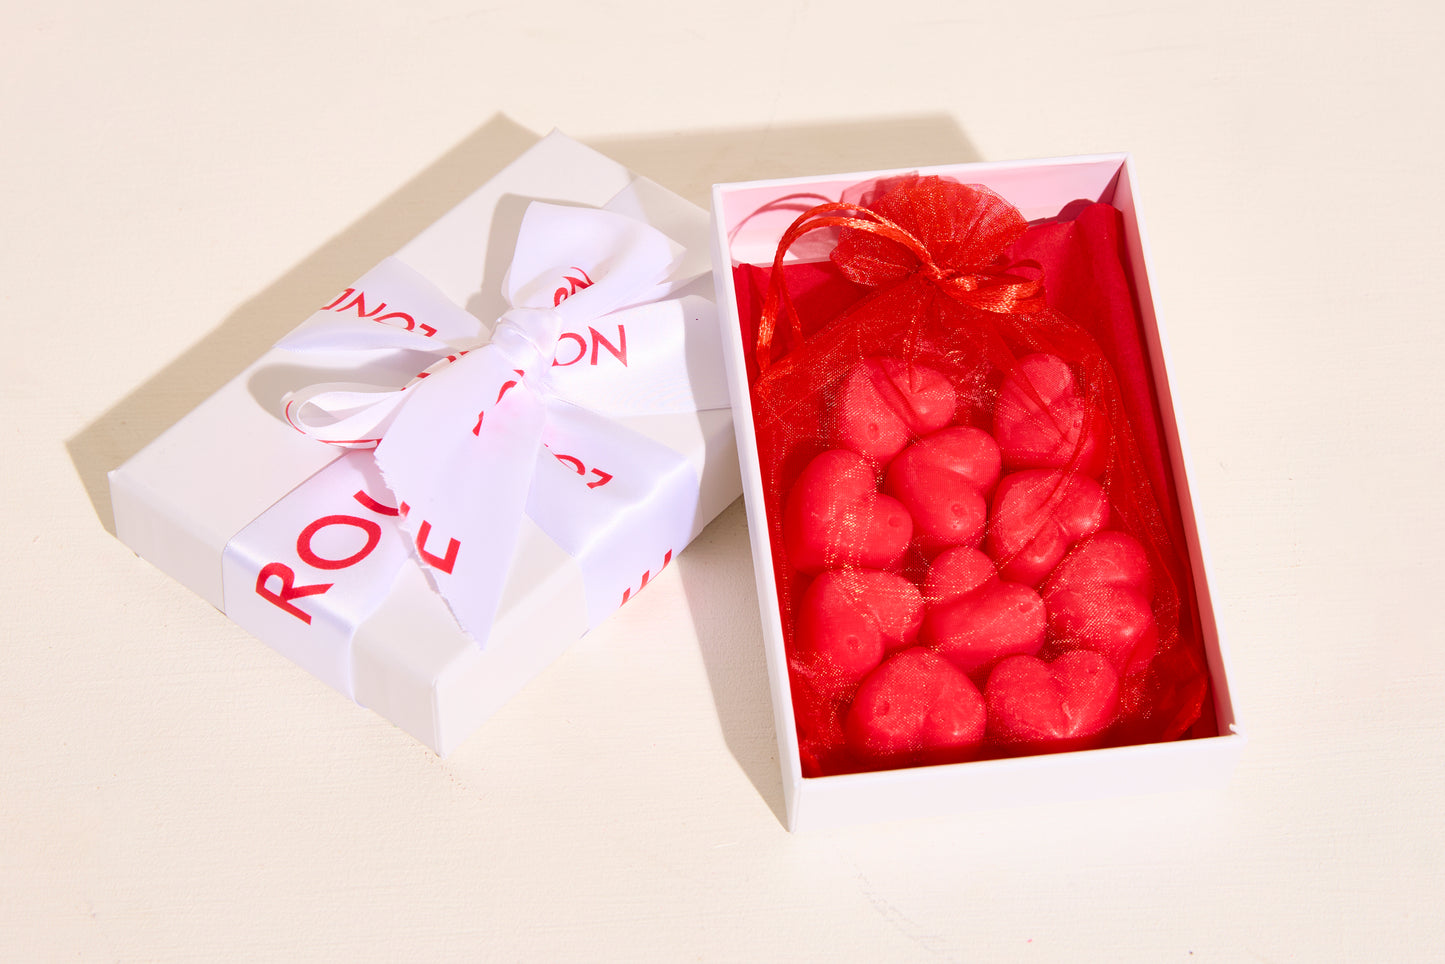 Love - Rose, Peony & Oud Luxury Scented Wax Melts - By Rouge London